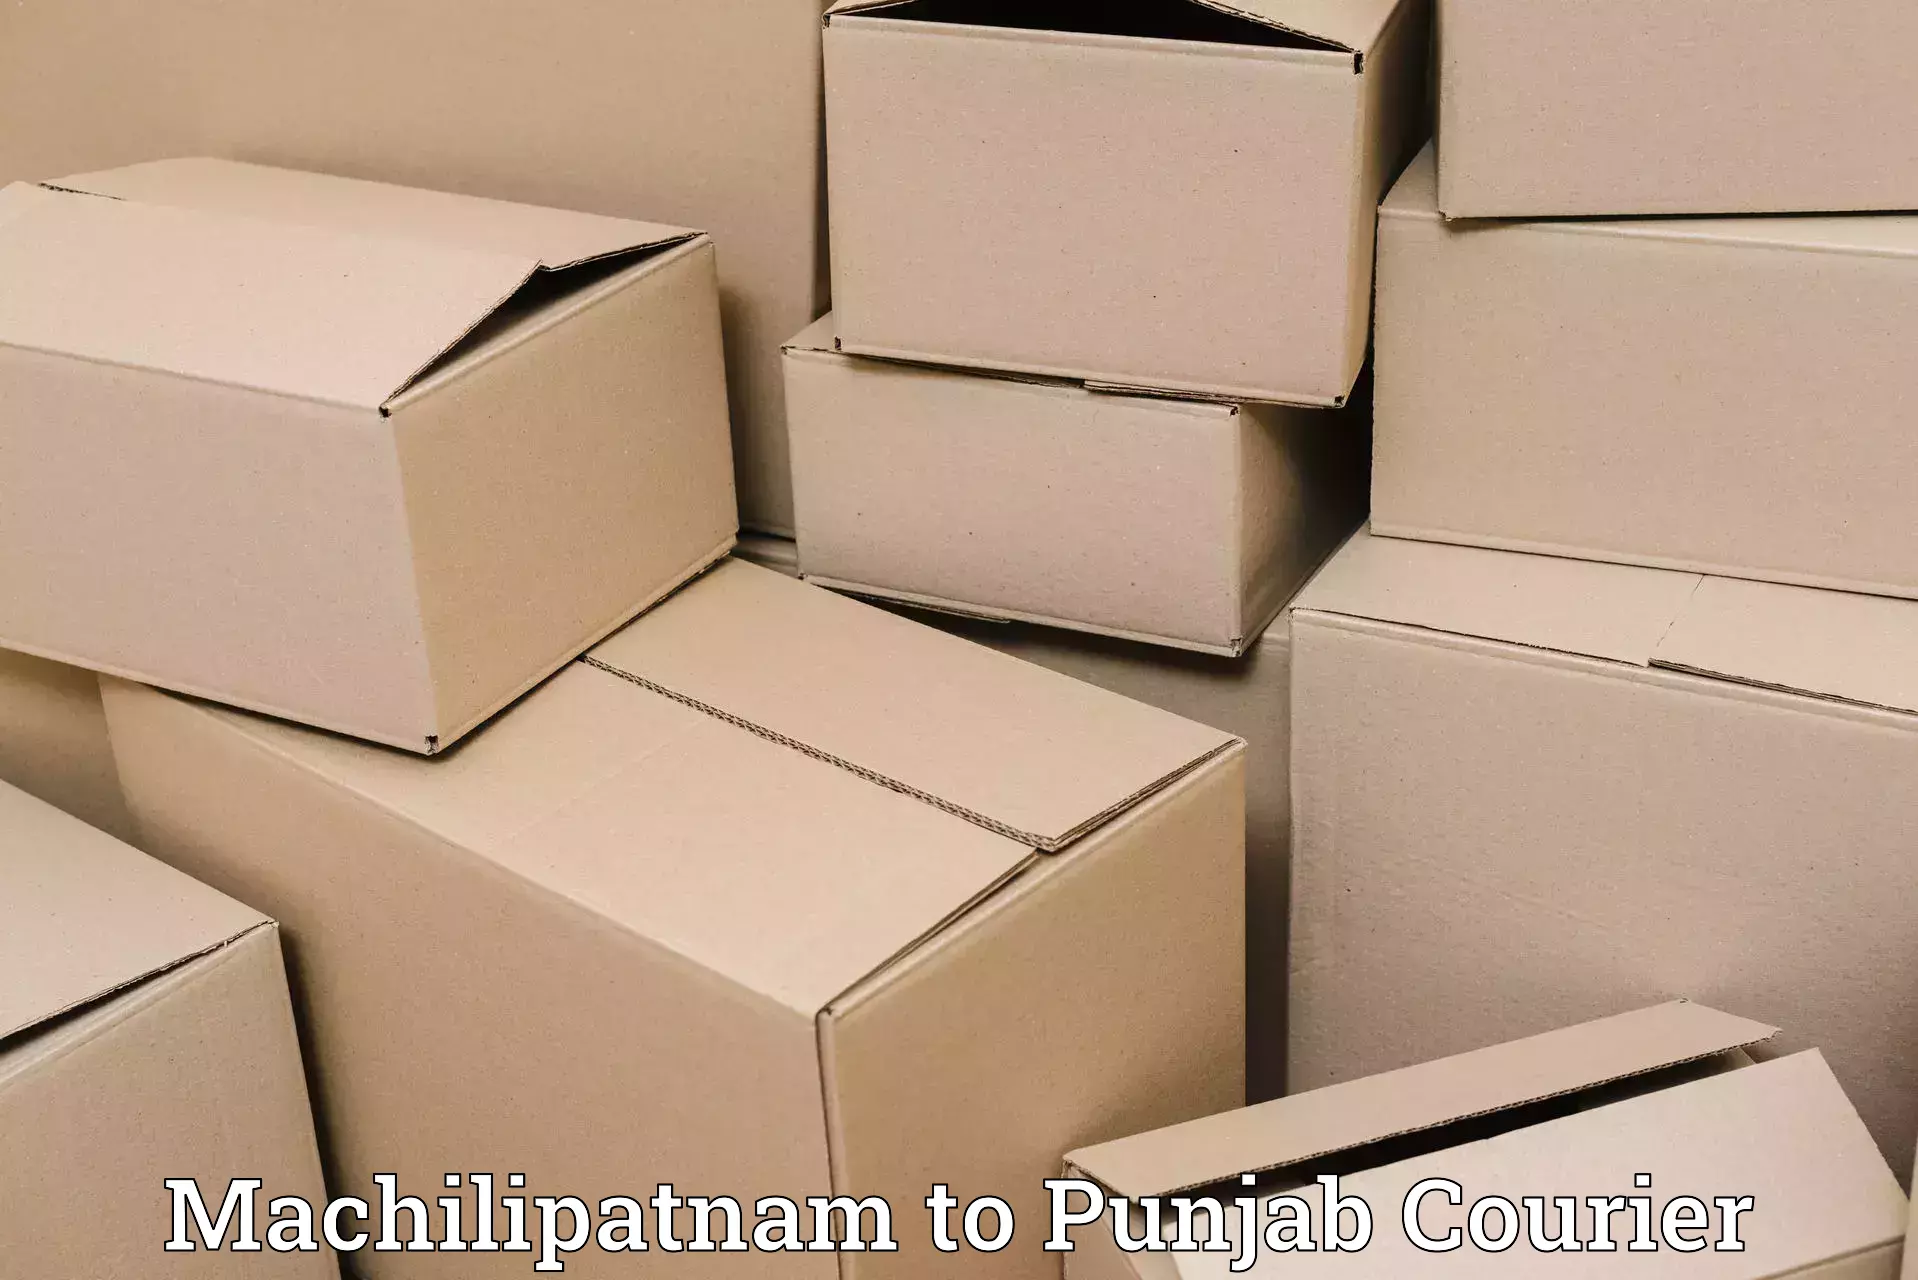 Express delivery capabilities Machilipatnam to Mohali